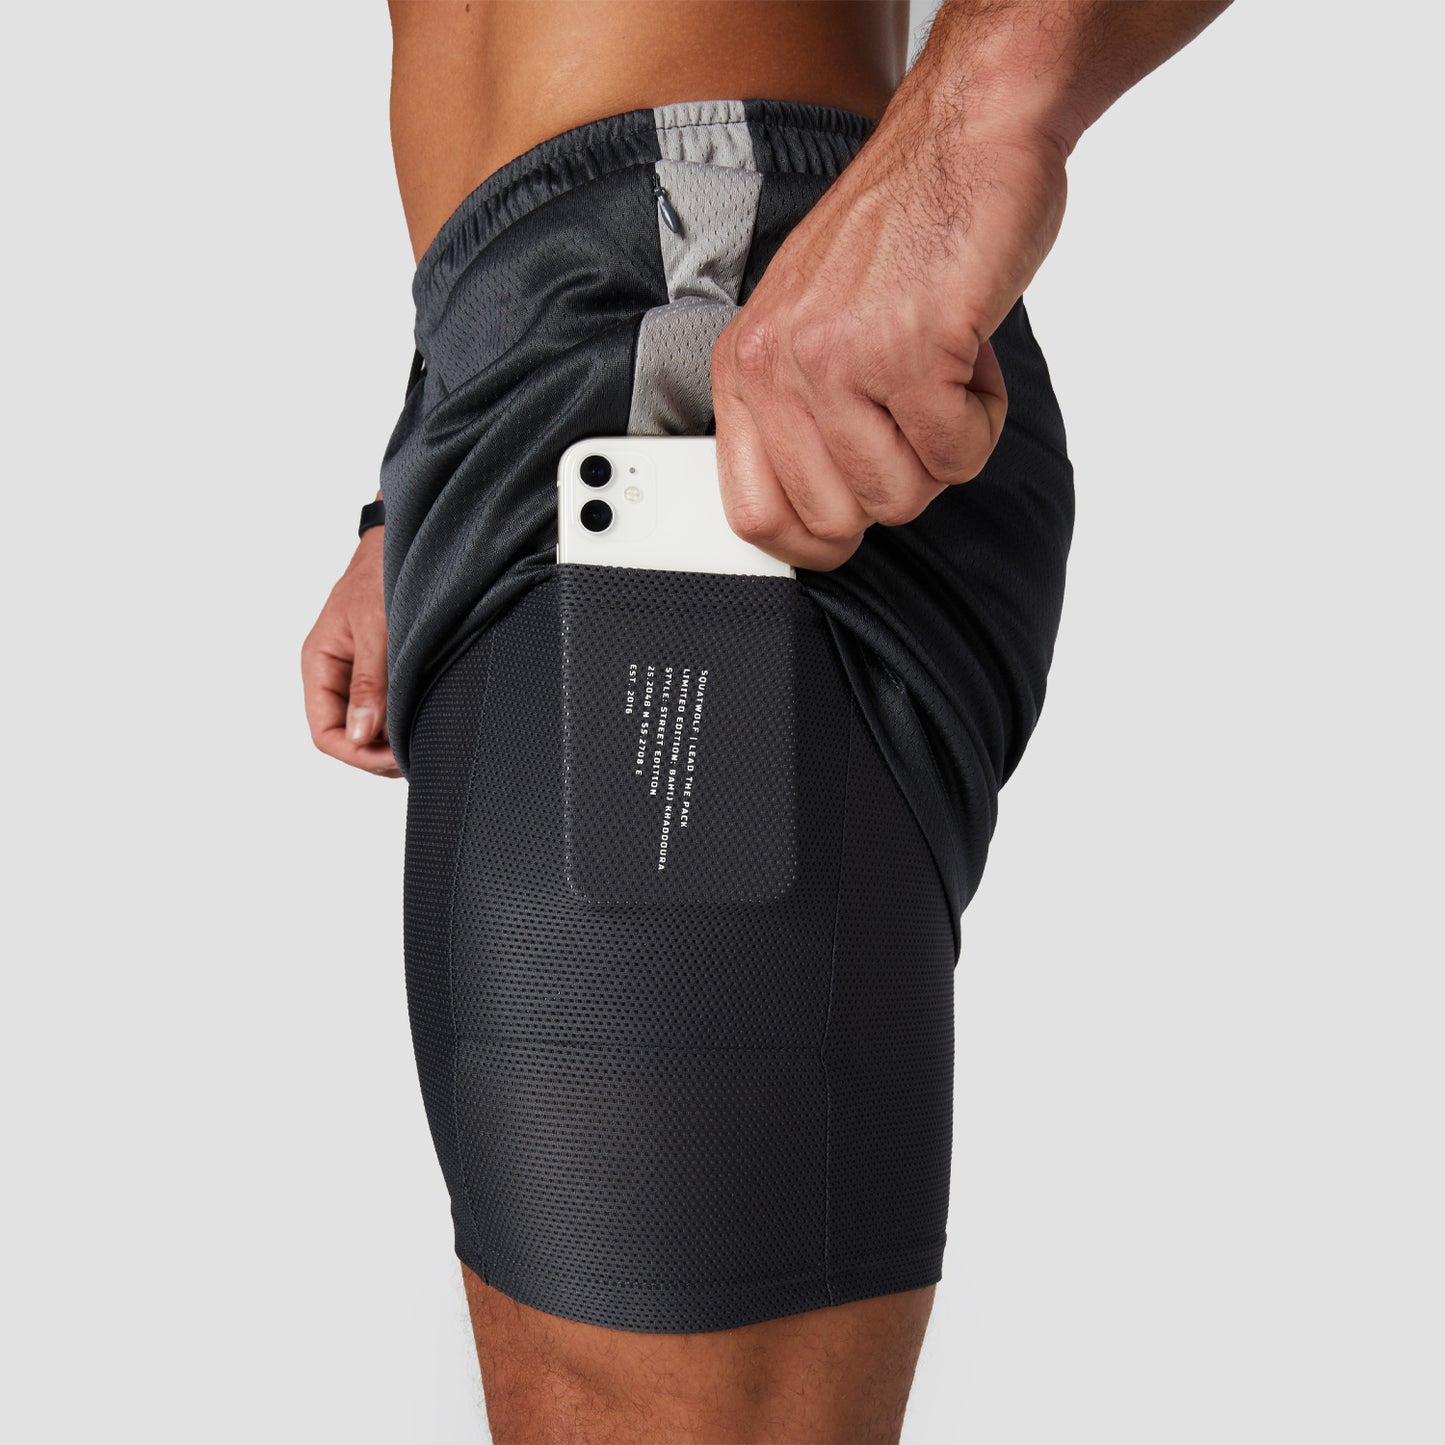 squatwolf-gym-wear-hybrid-performance-2-in-1-shorts-charcoal-workout-shorts-for-men